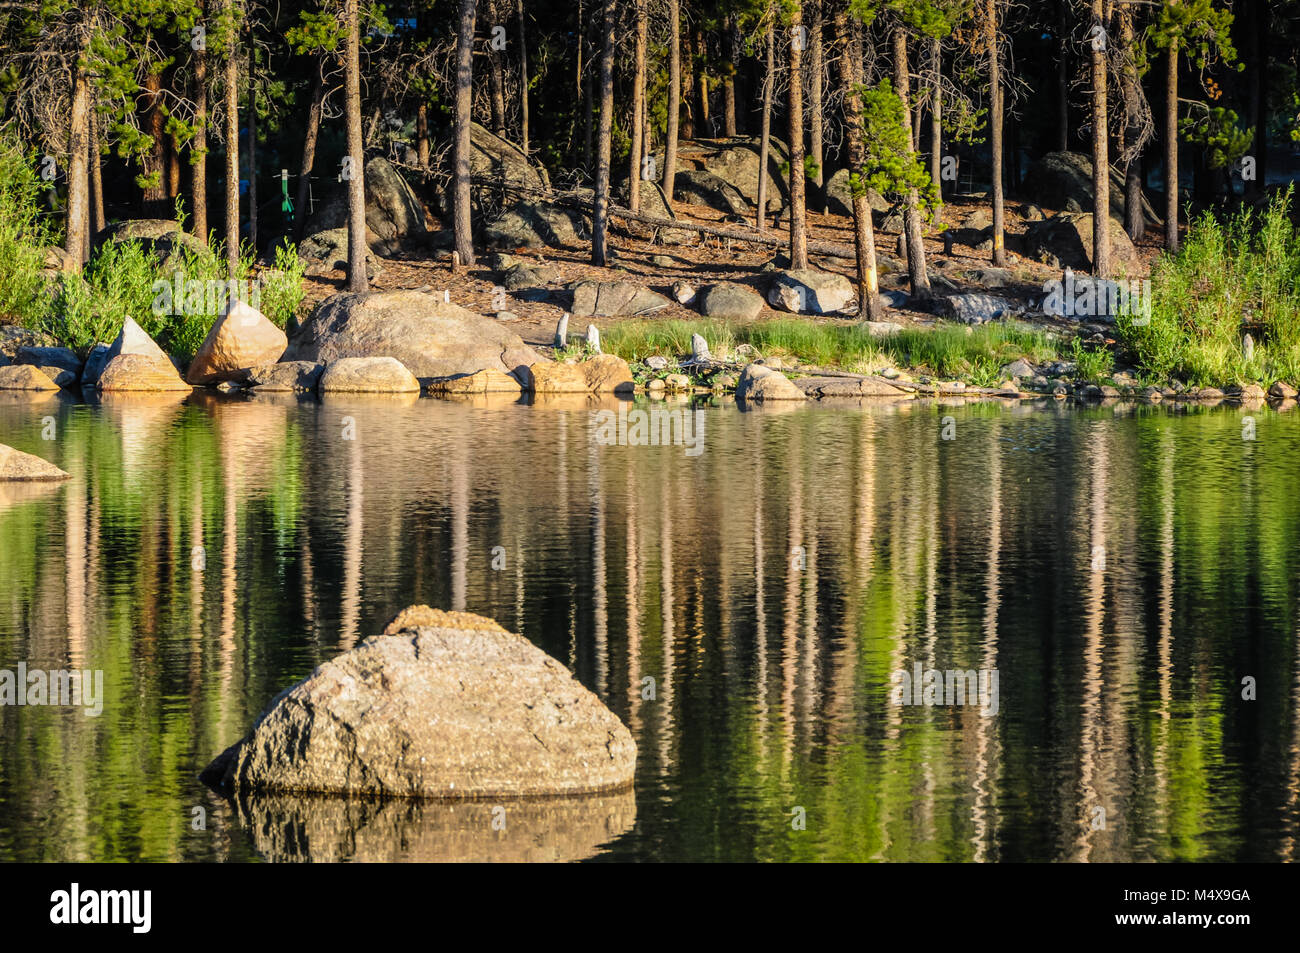 Triangular boulder juts out in a lake that reflects evergreen trees. Stock Photo